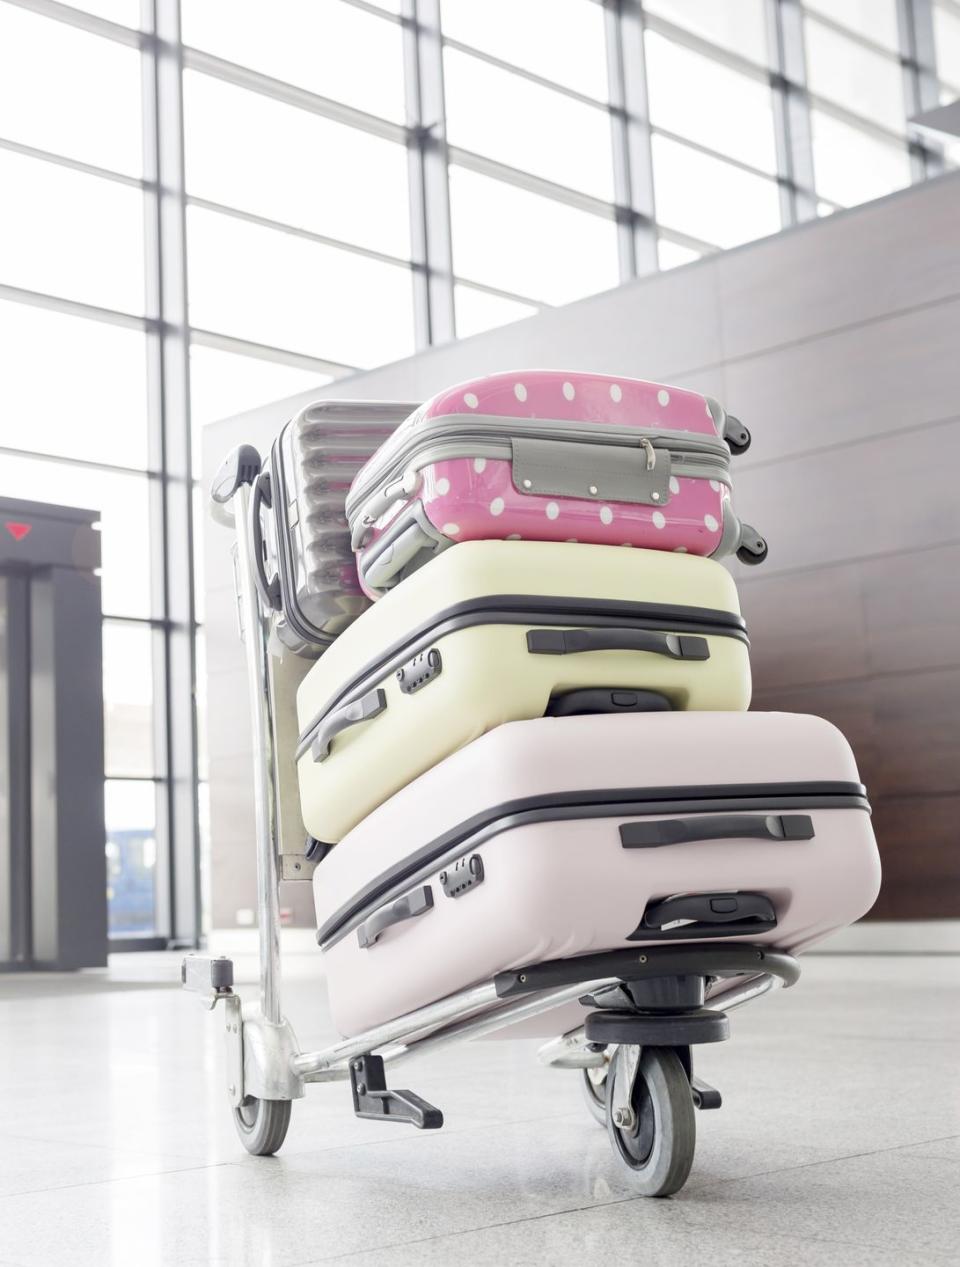 Secure Suitcases